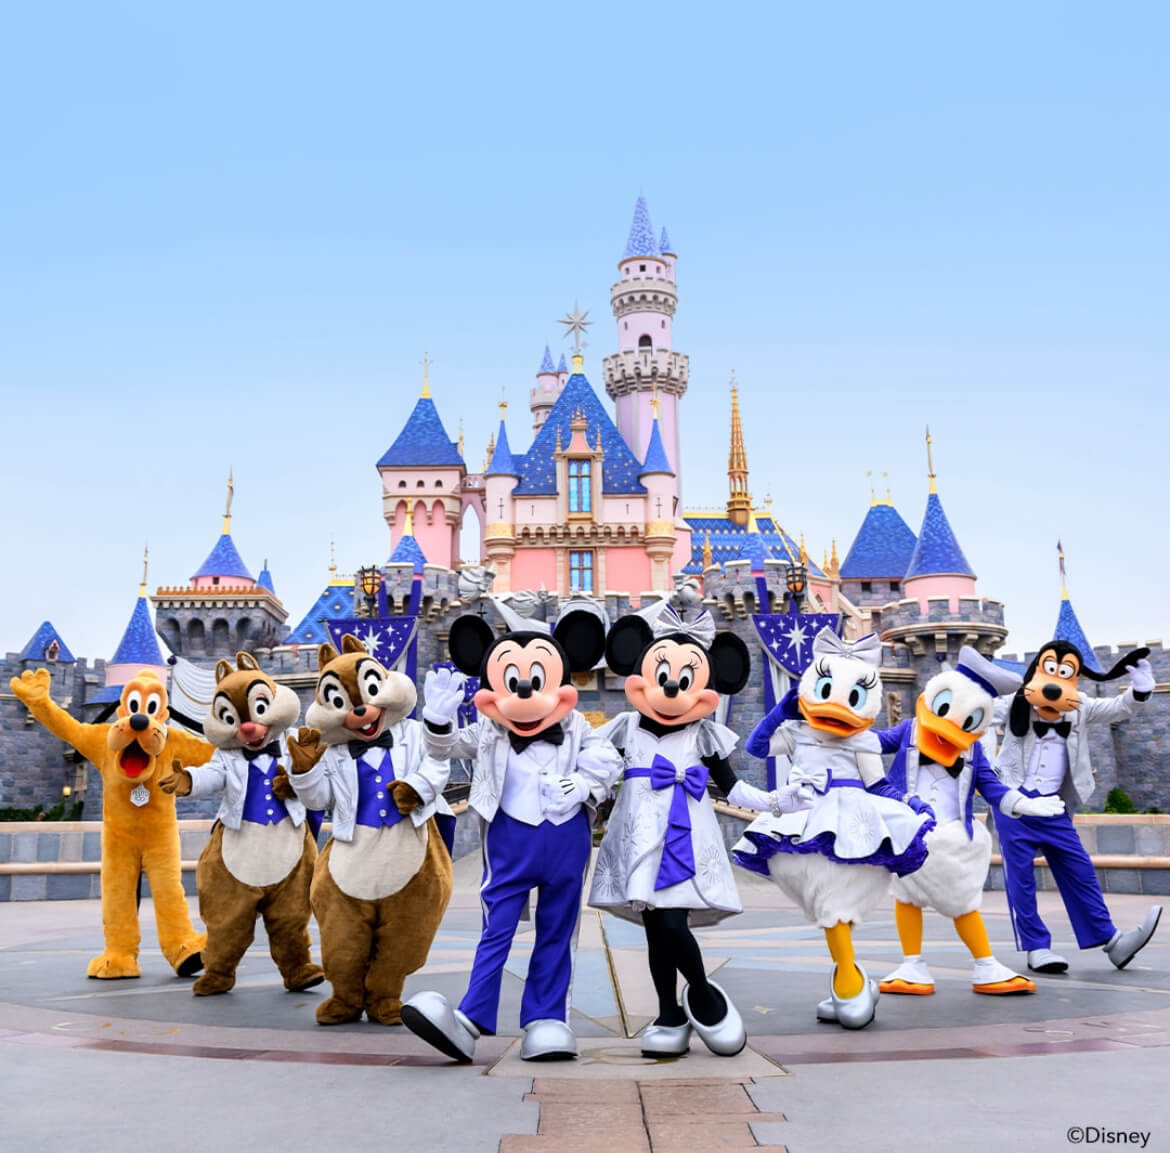 Mickey Mouse and friends in front of the iconic Walt Disney castle.